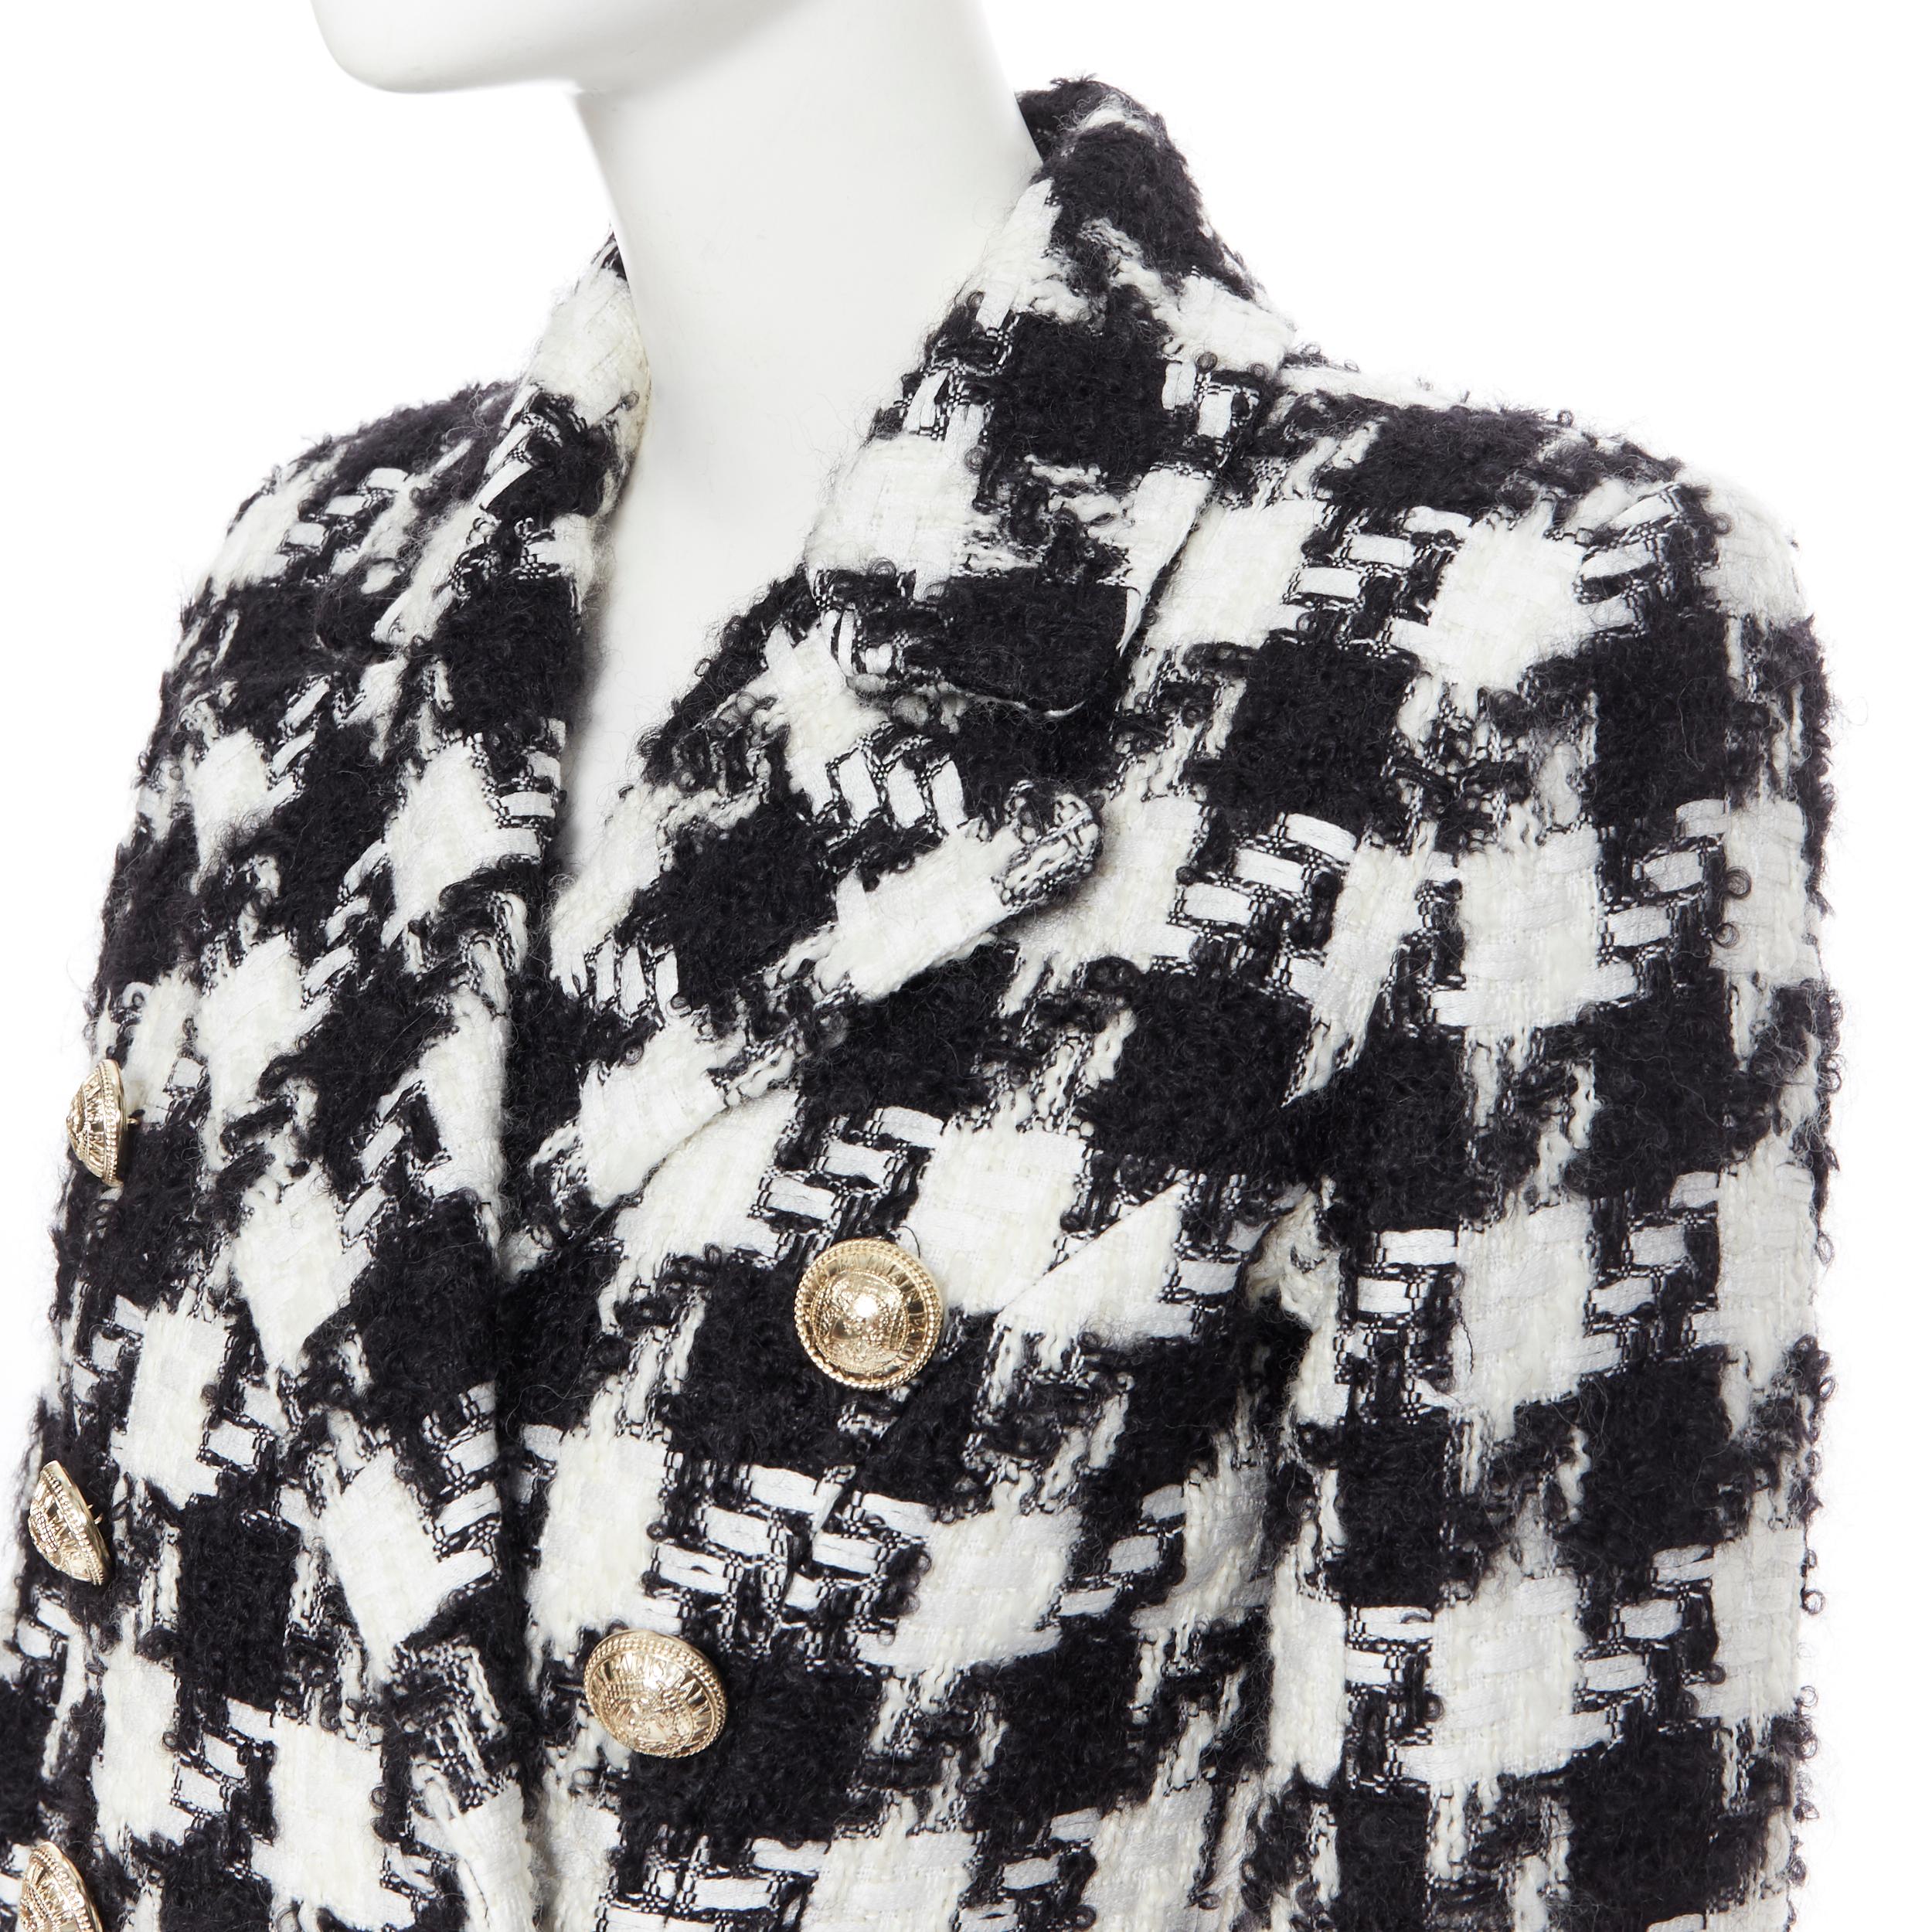 Women's new BALMAIN black white houndstooth tweed double breasted military coat FR34 XS